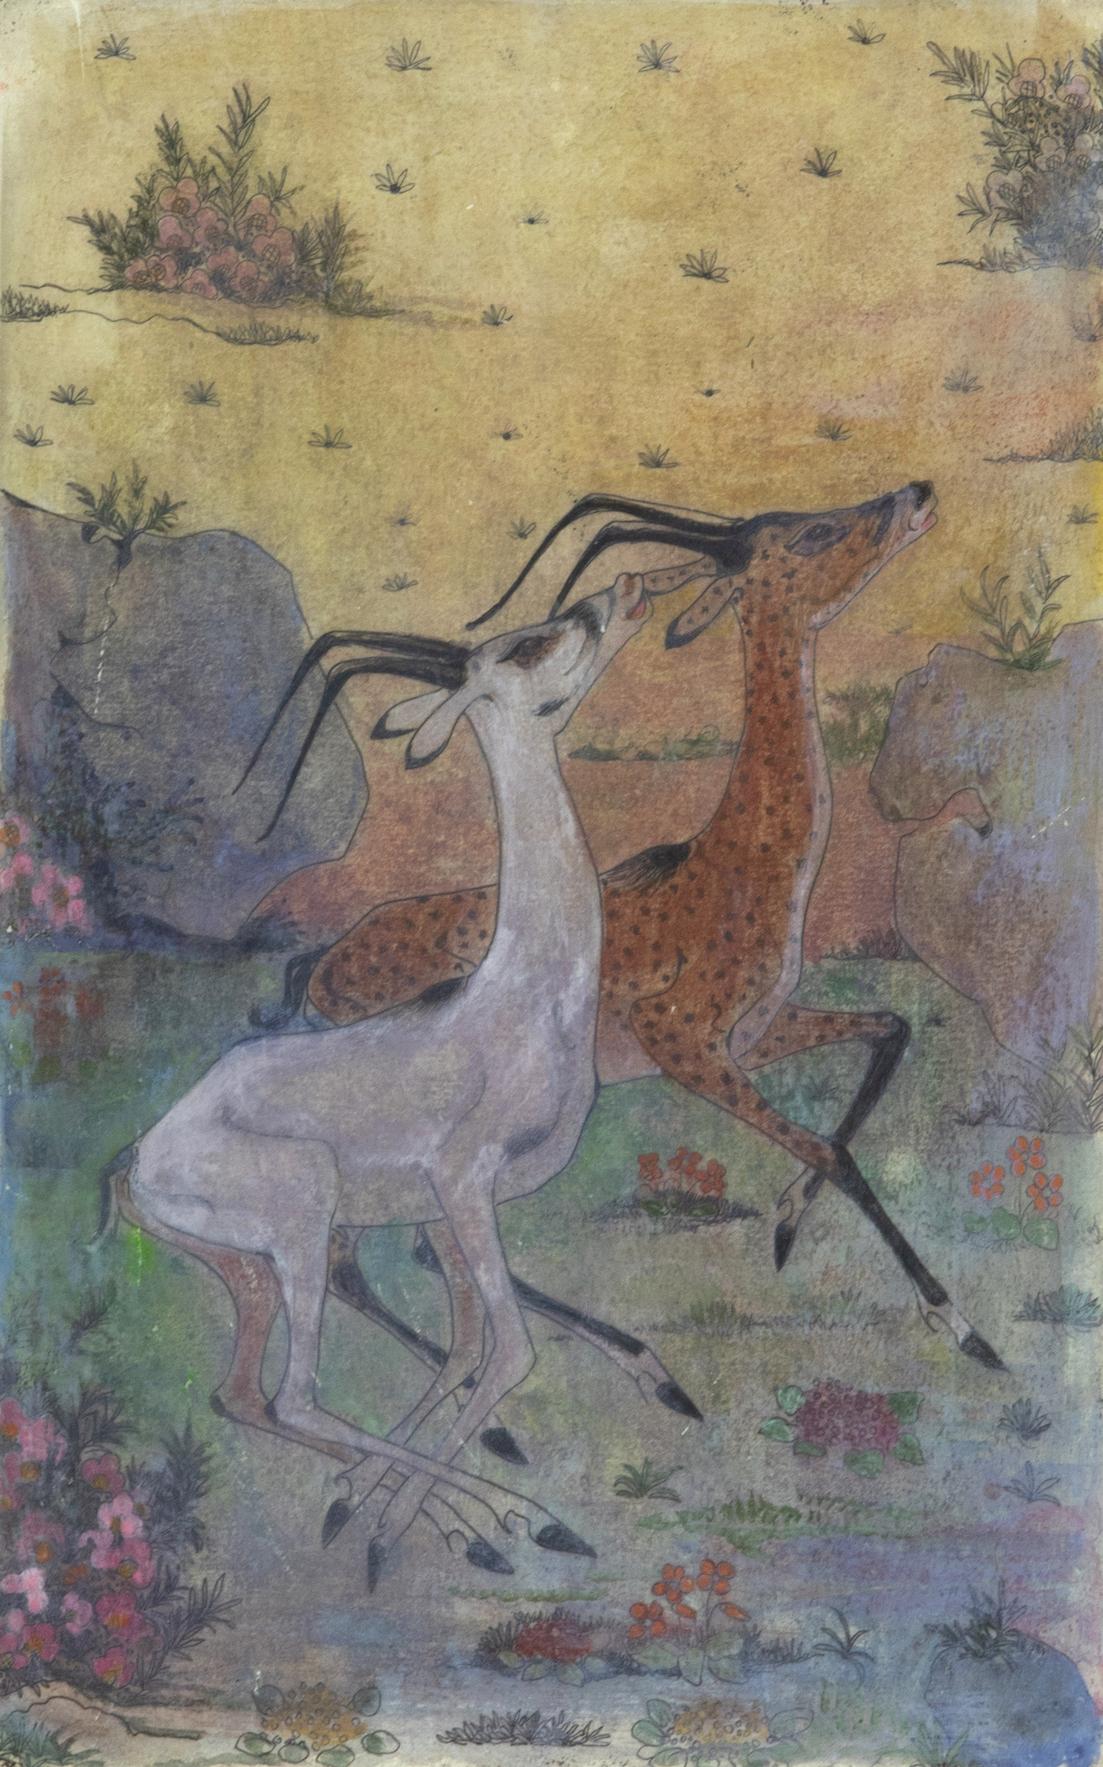 Gazelles by Orovida Pissarro (1893-1968)
Watercolour, hand-coloured over an etching
27.5 x 17.5 cm (10 ⅞ x 6 ⅞ inches)
Signed lower right Orovida

Provenance
Private collection, Europe

Artist biography
Orovida Camille Pissarro, Lucien and Esther